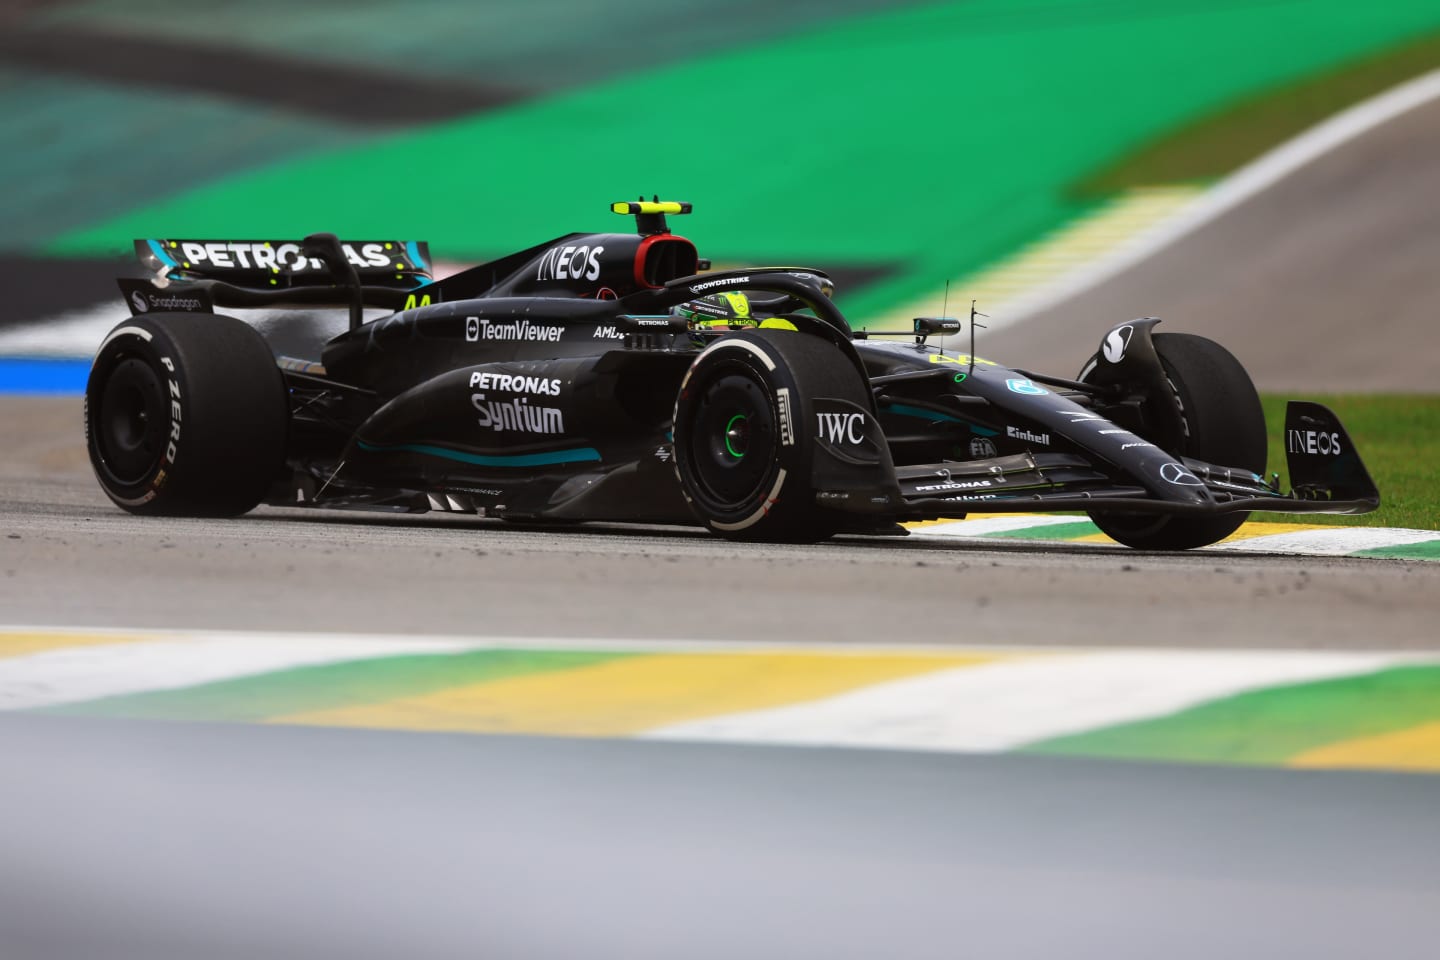 SAO PAULO, BRAZIL - NOVEMBER 03: Lewis Hamilton of Great Britain driving the (44) Mercedes AMG Petronas F1 Team W14 on track during practice ahead of the F1 Grand Prix of Brazil at Autodromo Jose Carlos Pace on November 03, 2023 in Sao Paulo, Brazil. (Photo by Buda Mendes/Getty Images)